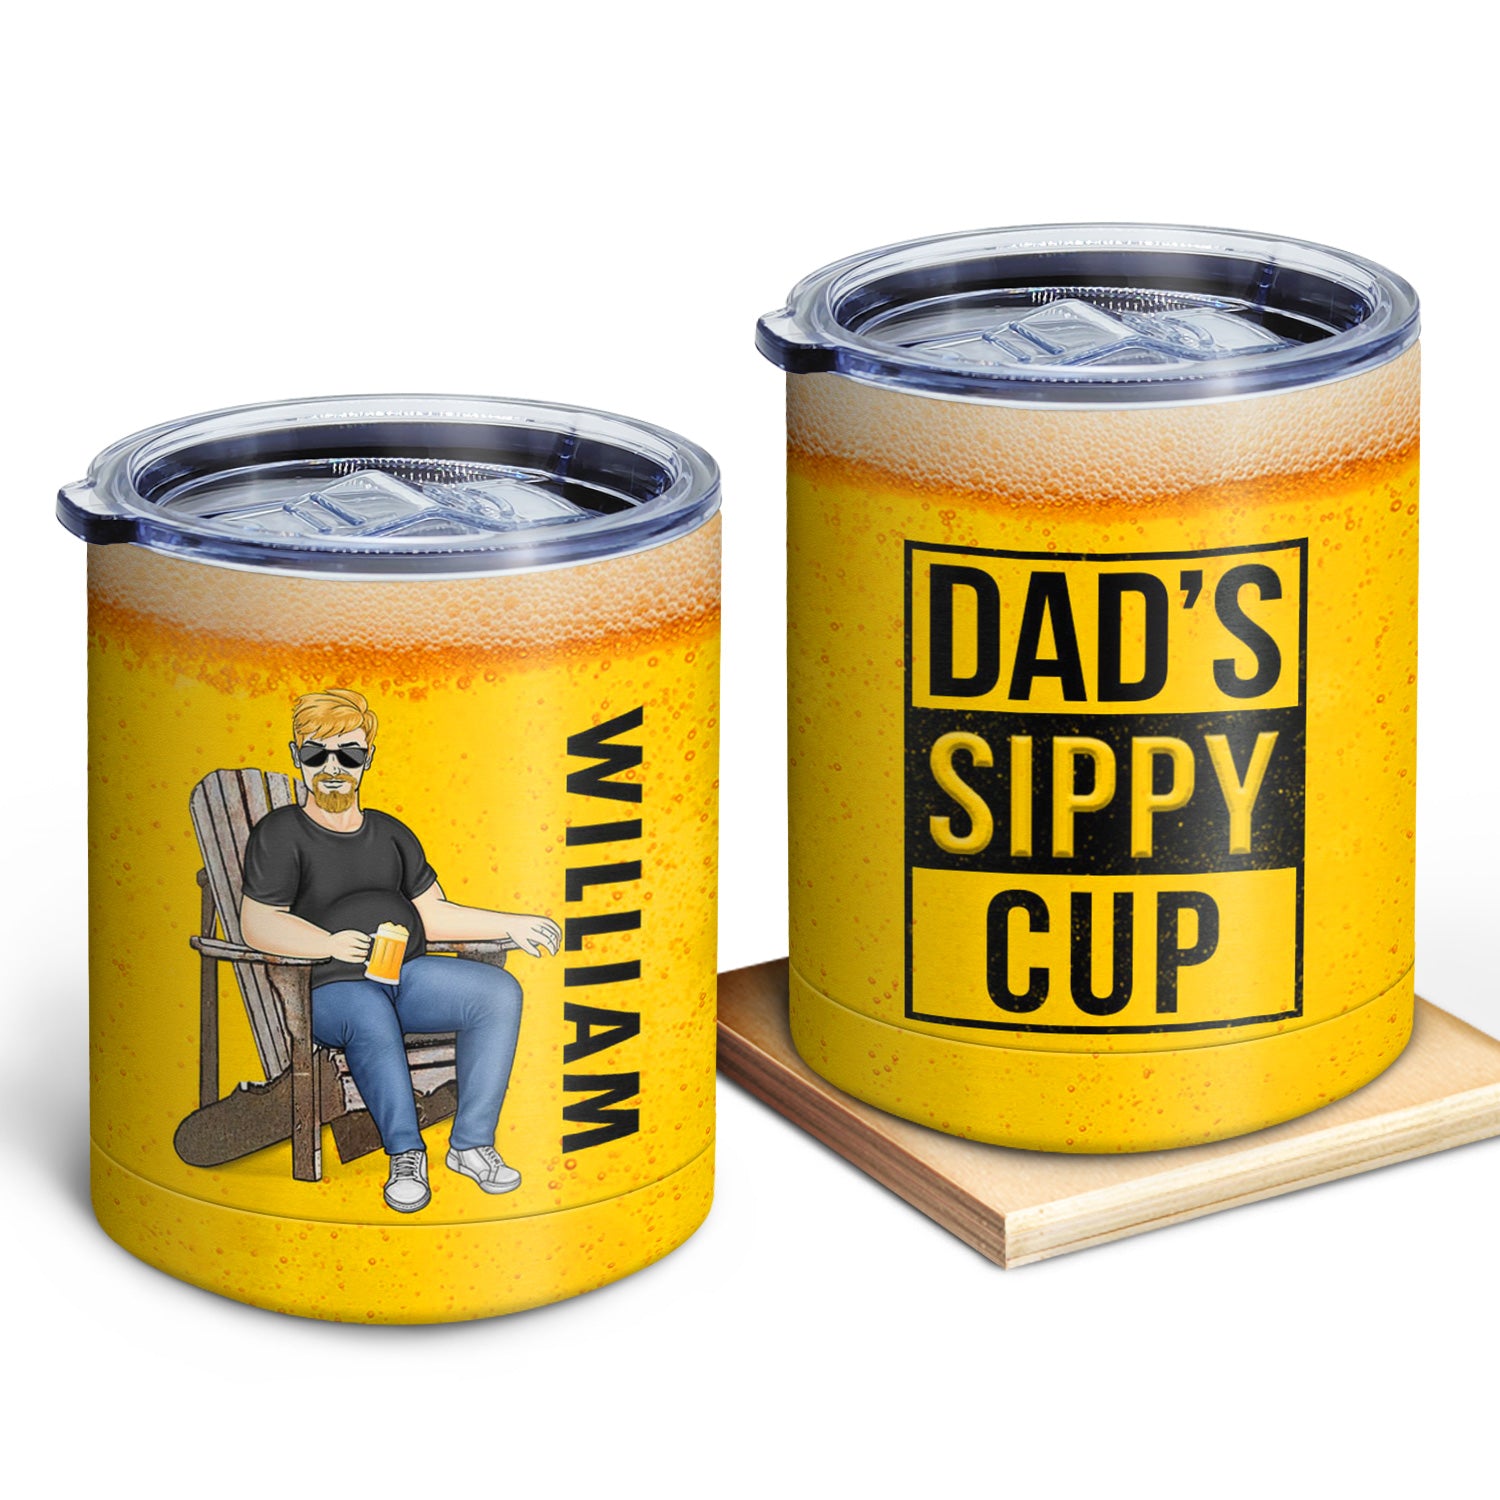 Dad's Sippy Cup - Birthday Gift For Father, Grandpa, Grandma - Personalized Lowball Tumbler